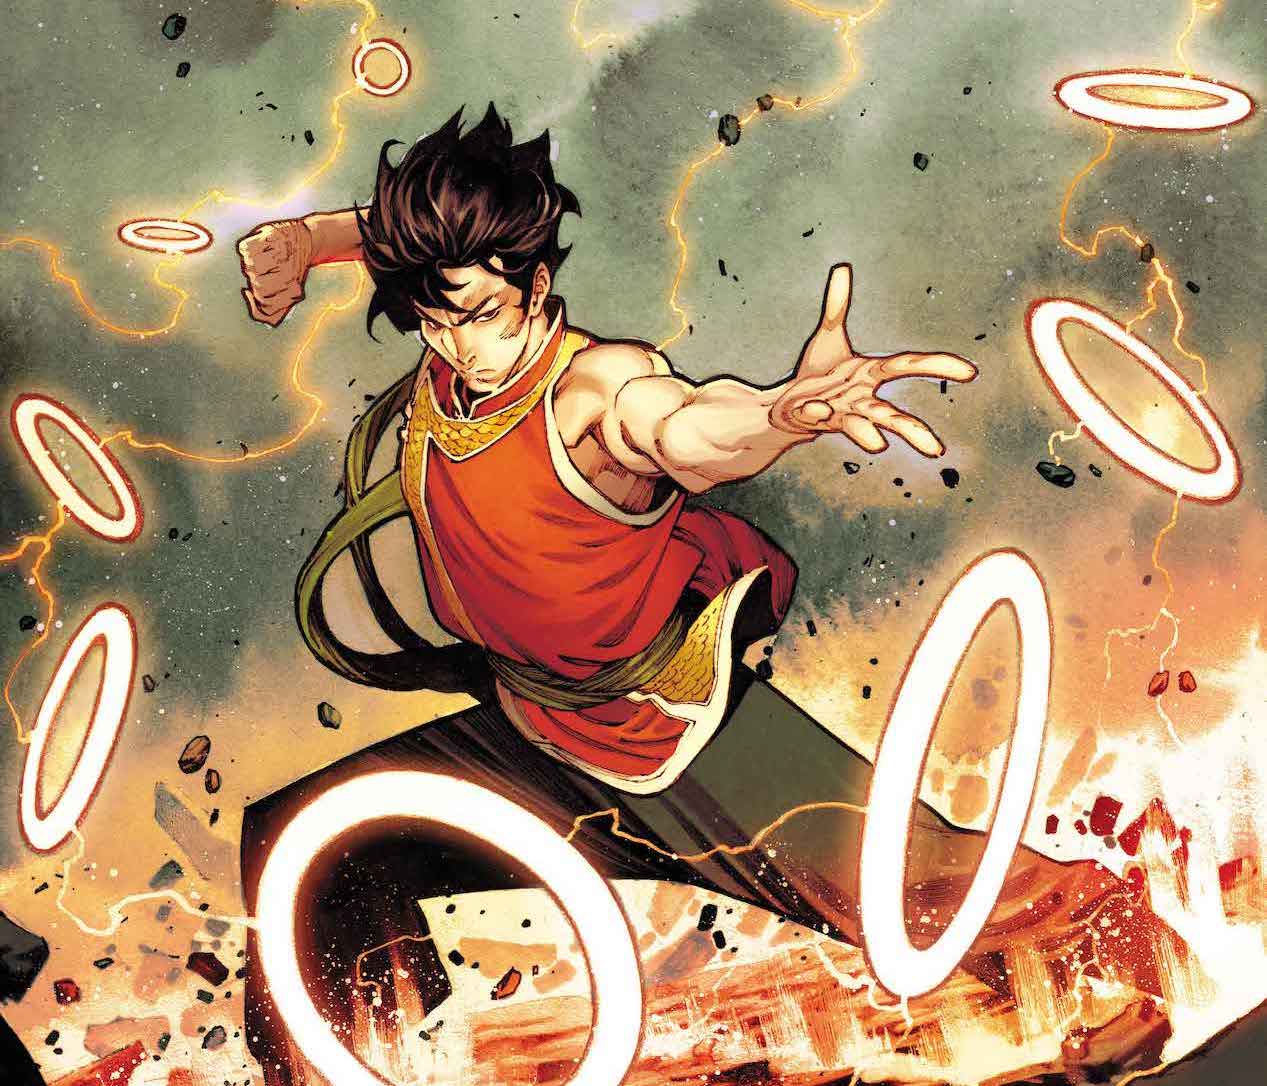 Watch 'Shang-Chi and the Ten Rings' #1 trailer